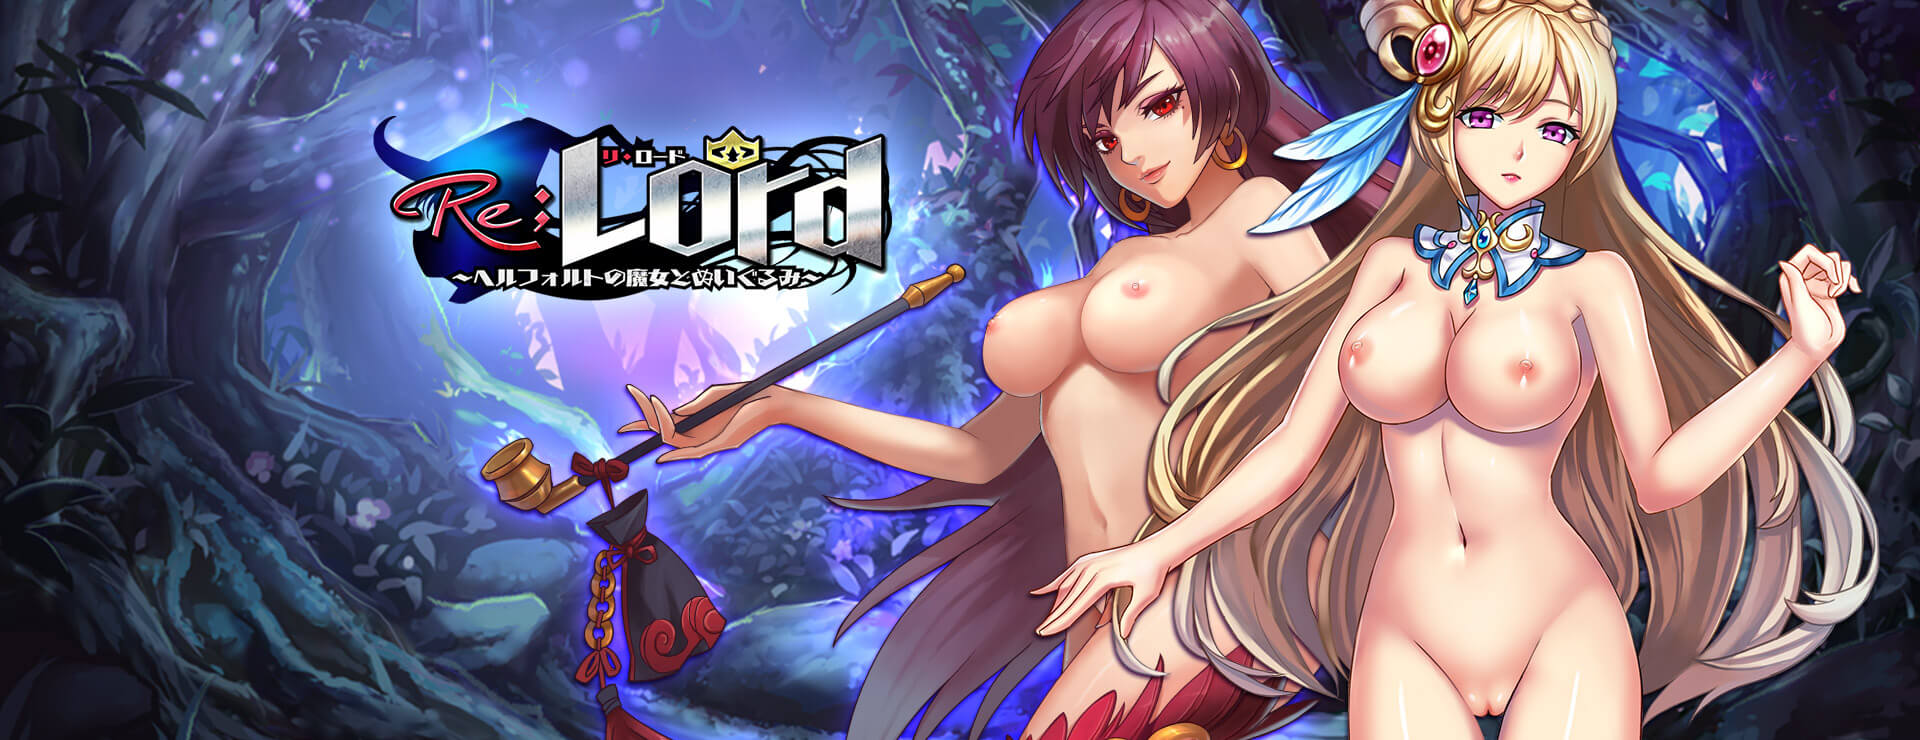 Re:Lord 1 - RPG Juego